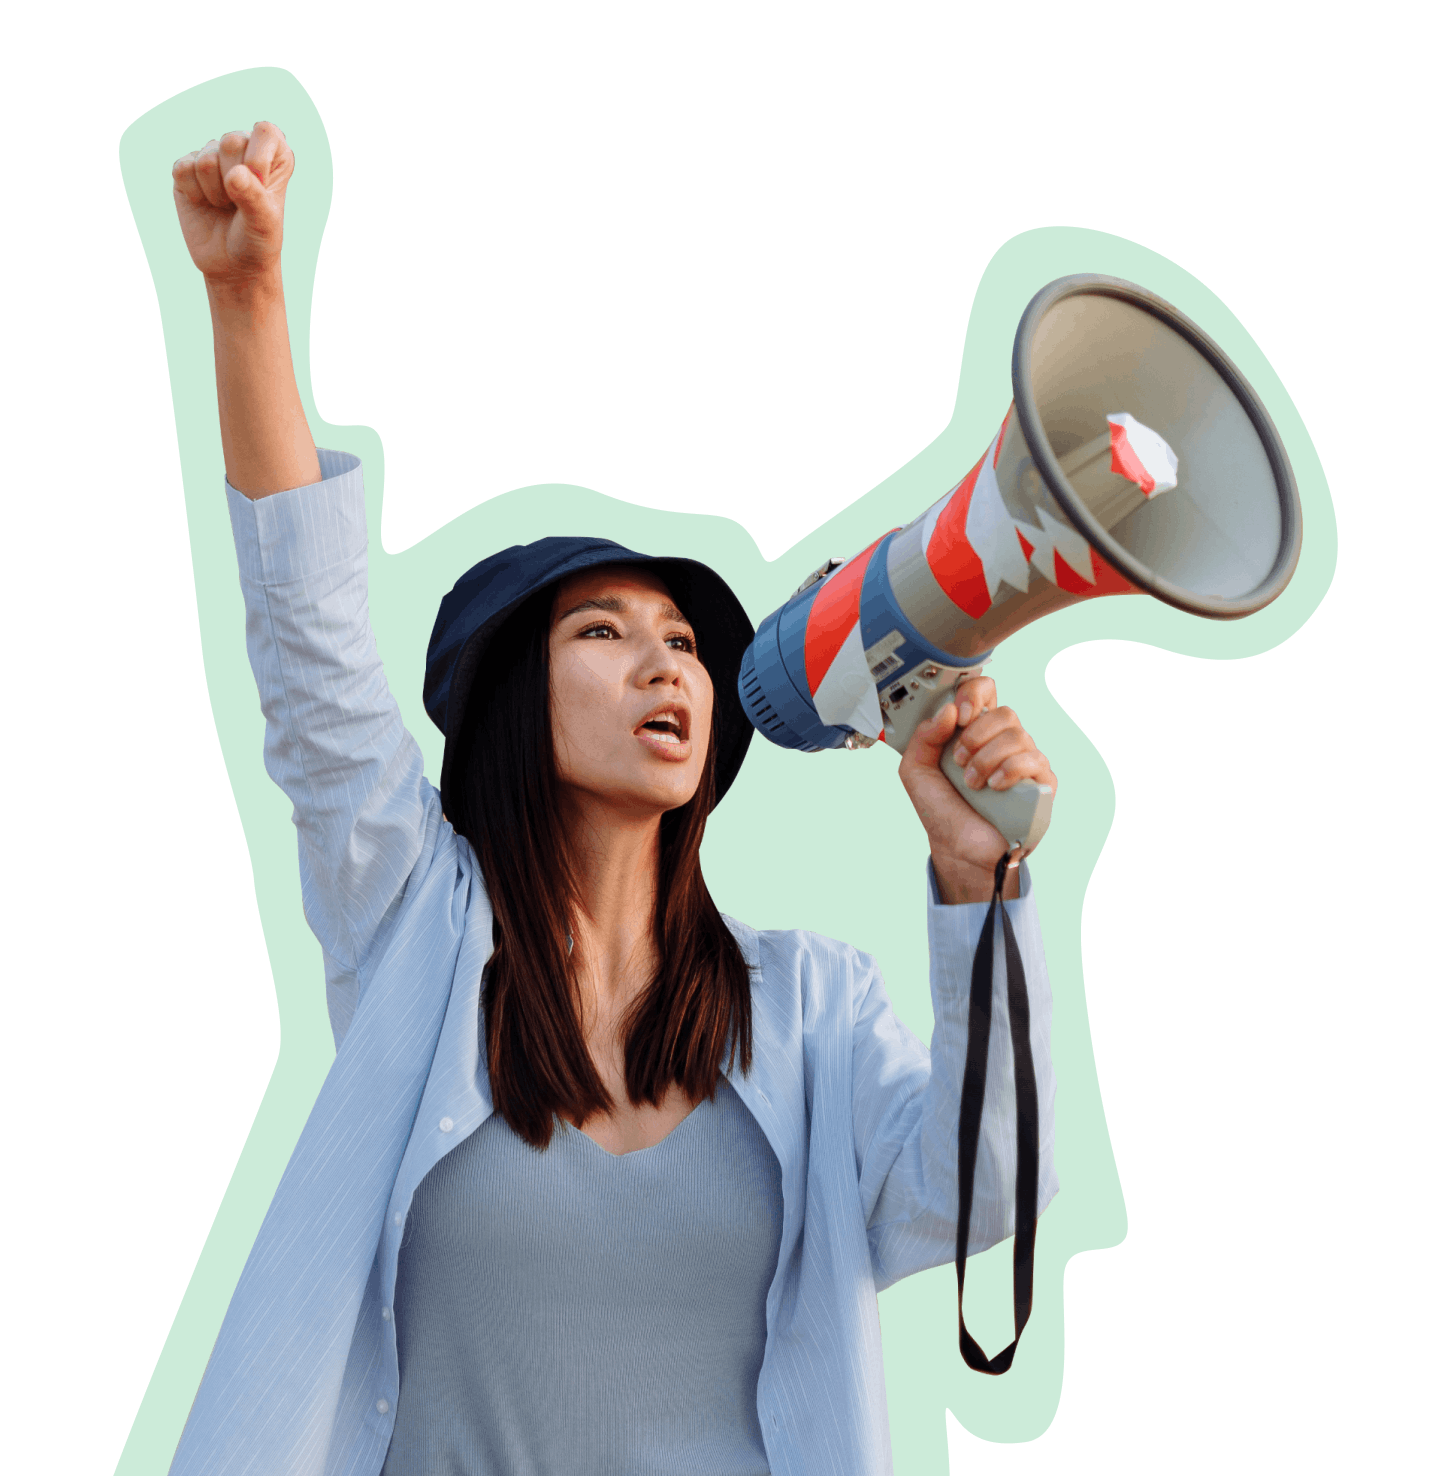 Woman yelling into a megaphone and raising her right fist into the air